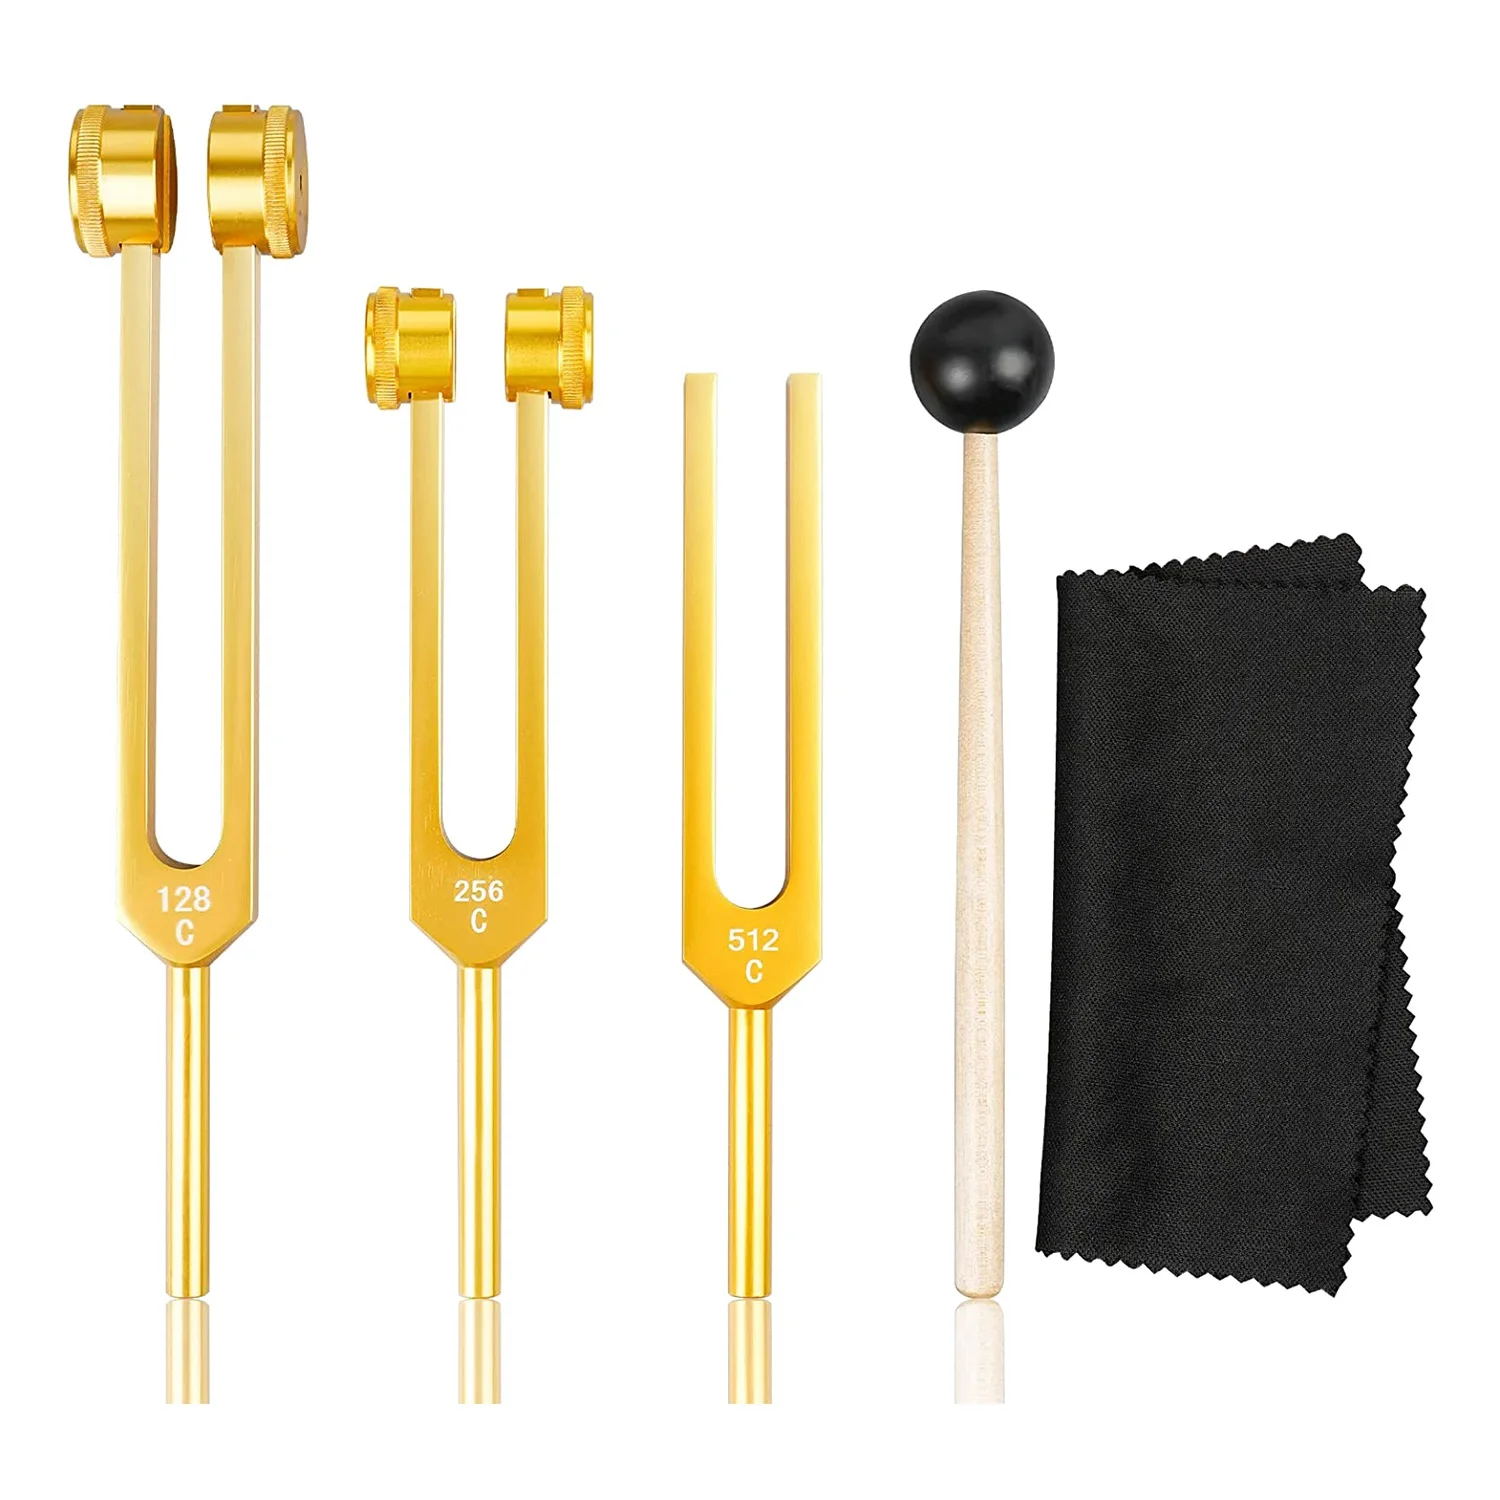 

Tuning Fork Set (128Hz, 256Hz, 512Hz) Tuning Forks for Healing Chakra for Healing, Sound Therapy, Reliever Stress